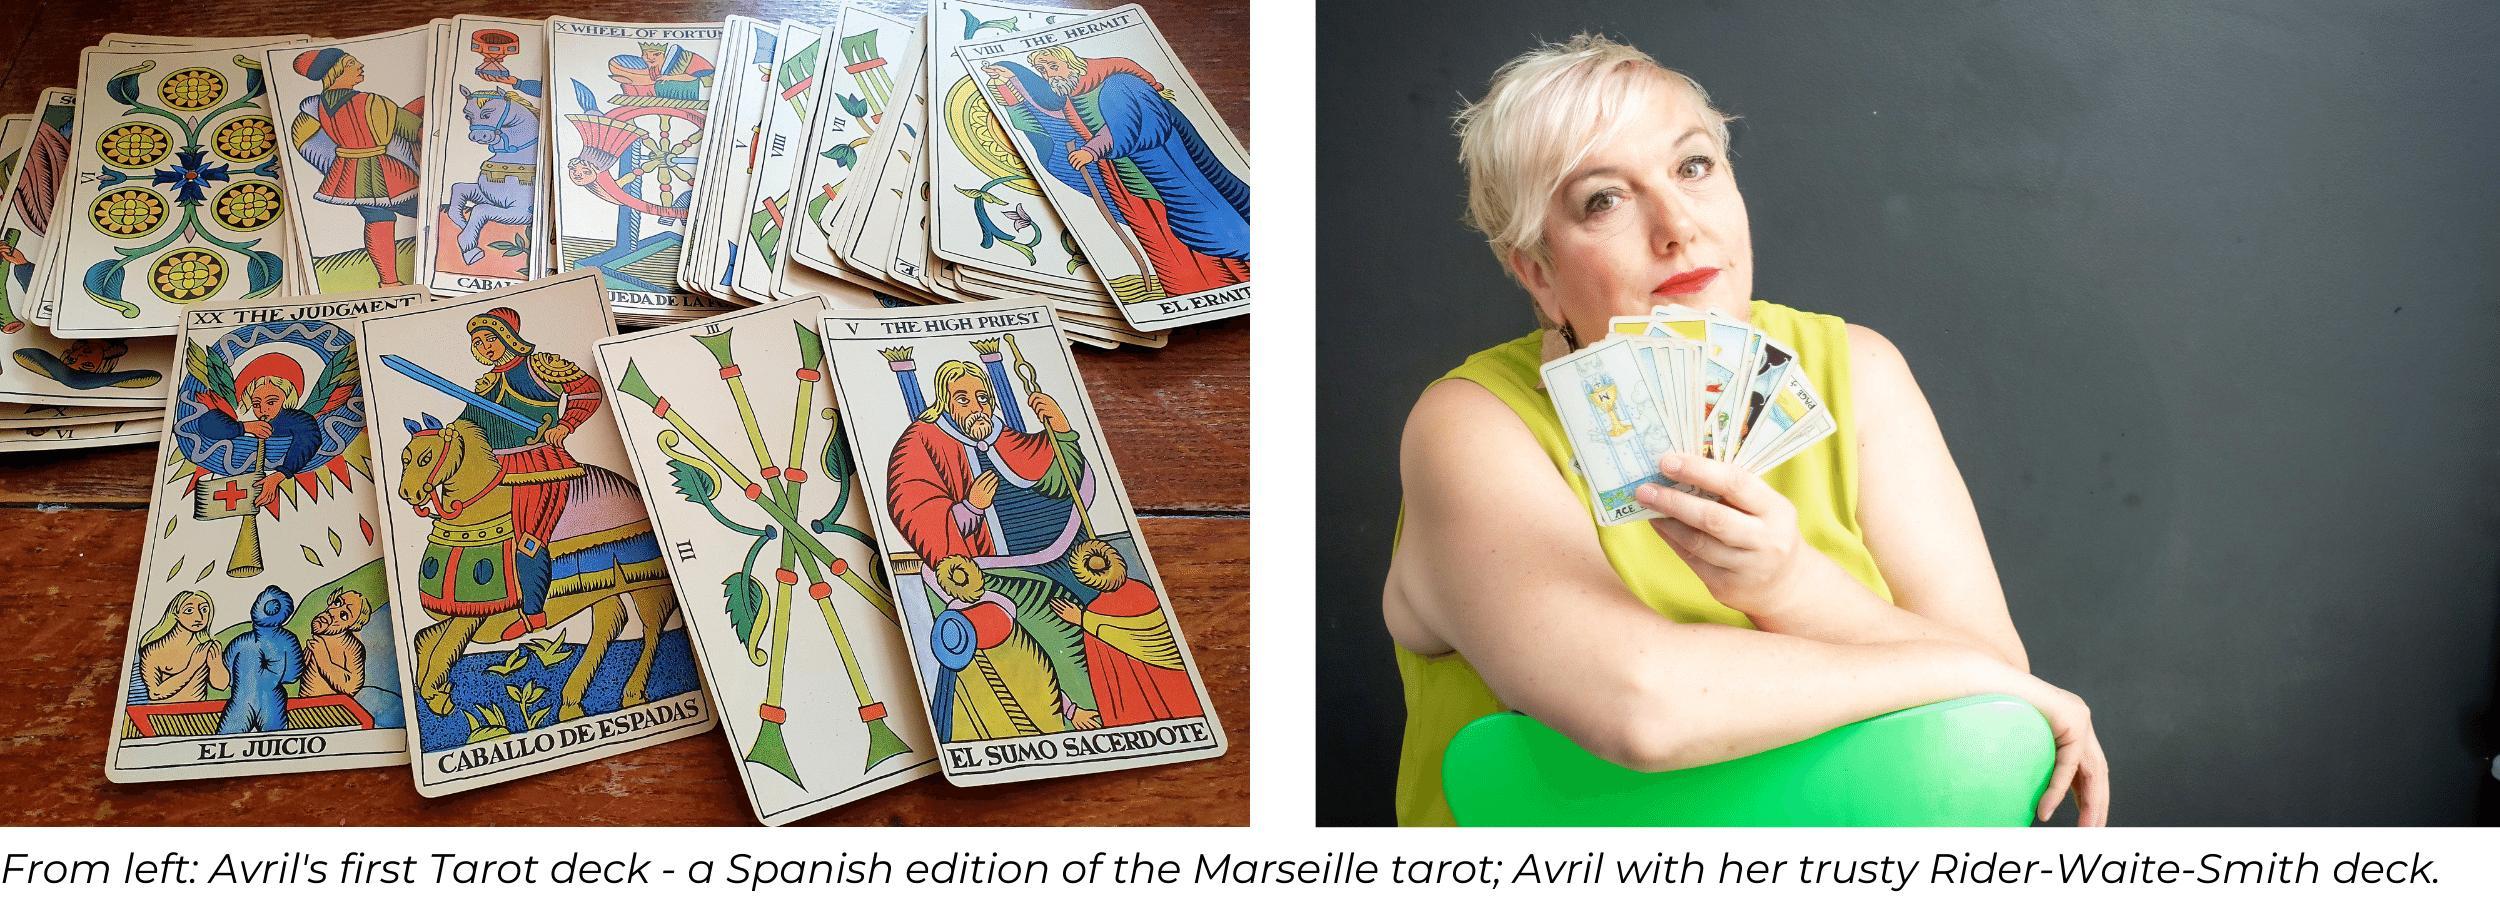 Avril Price with her first tarot deck, the Marseille tarot